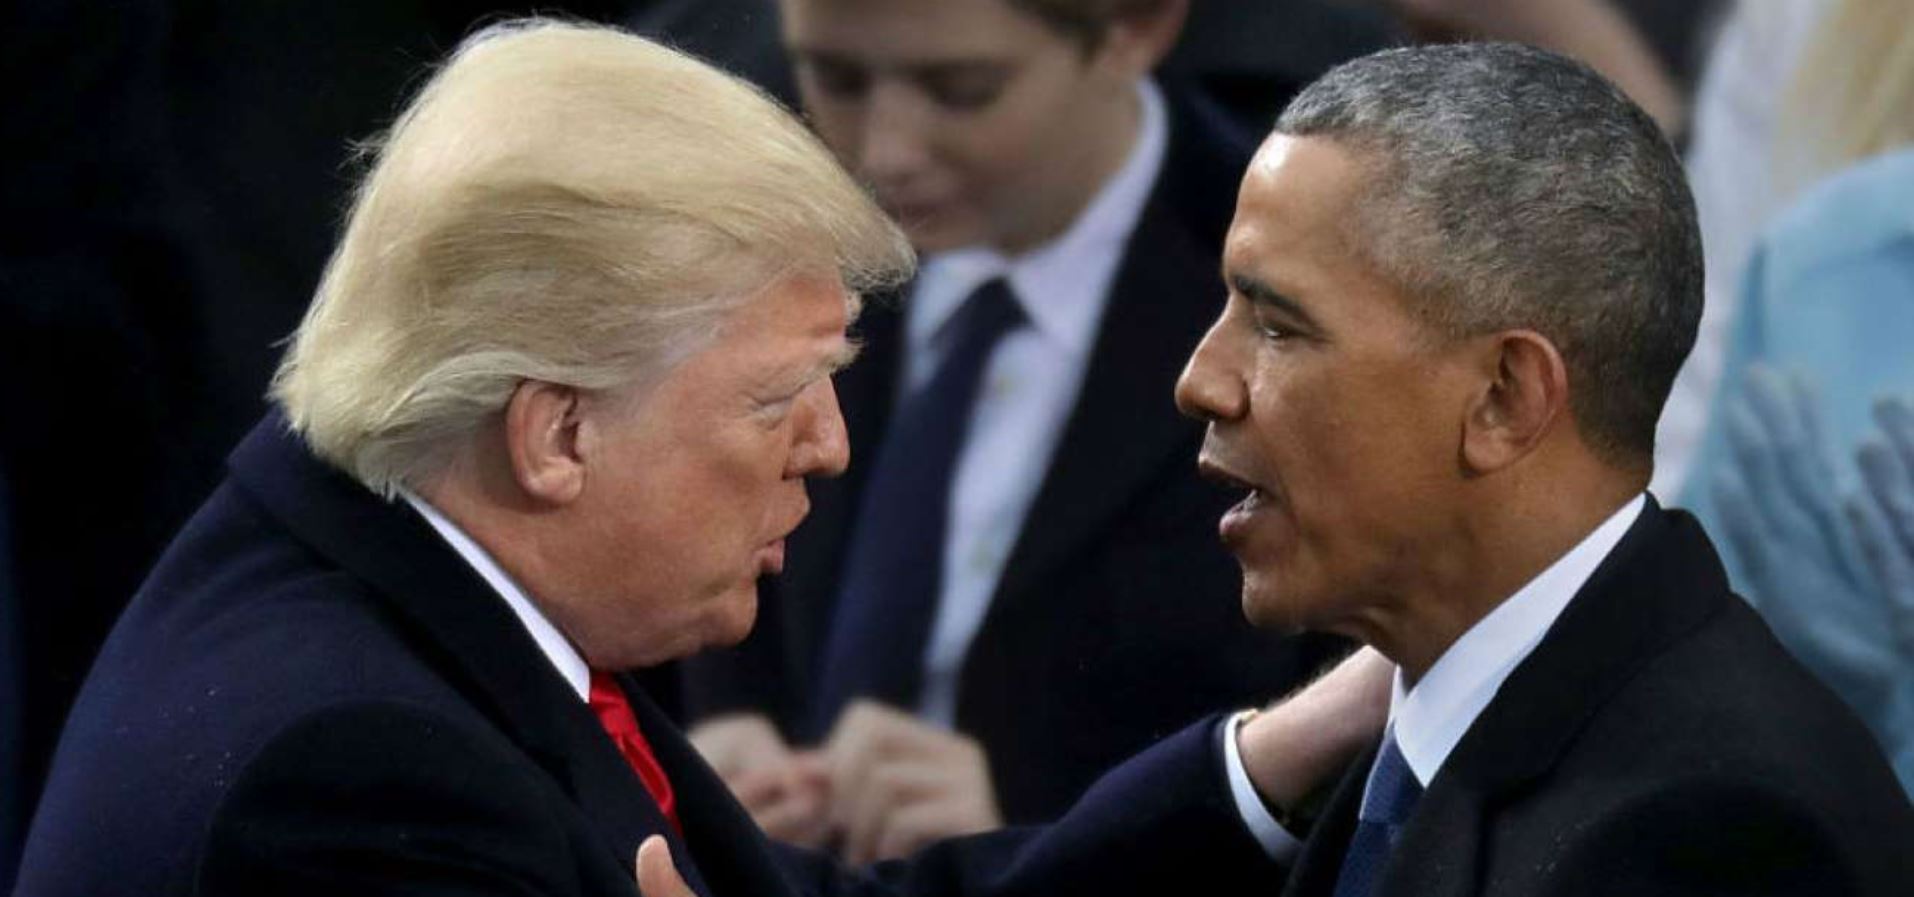 Report – Obama Furious Over Trump’s Wiretapping Accusation